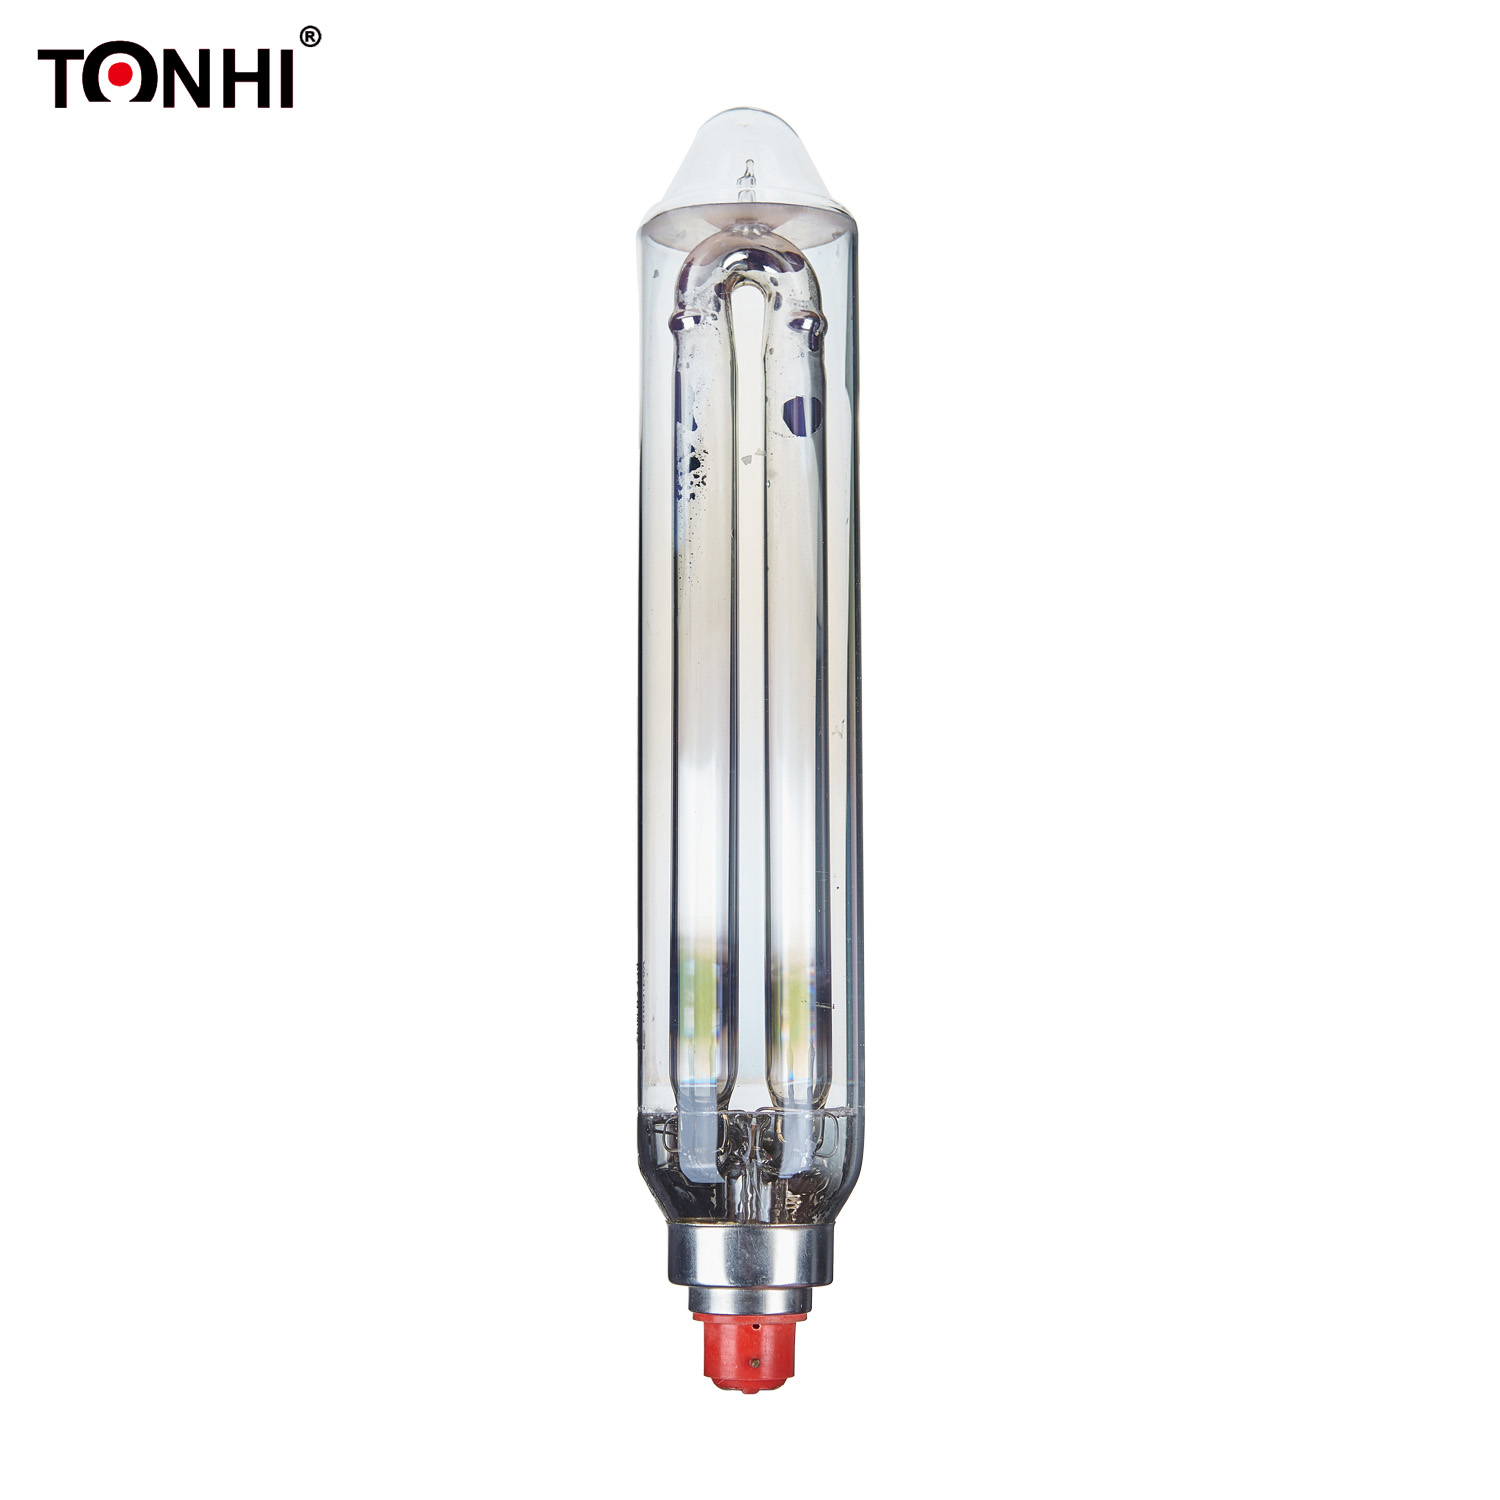 SOX-E 26W BY22d low pressure sodium lamp